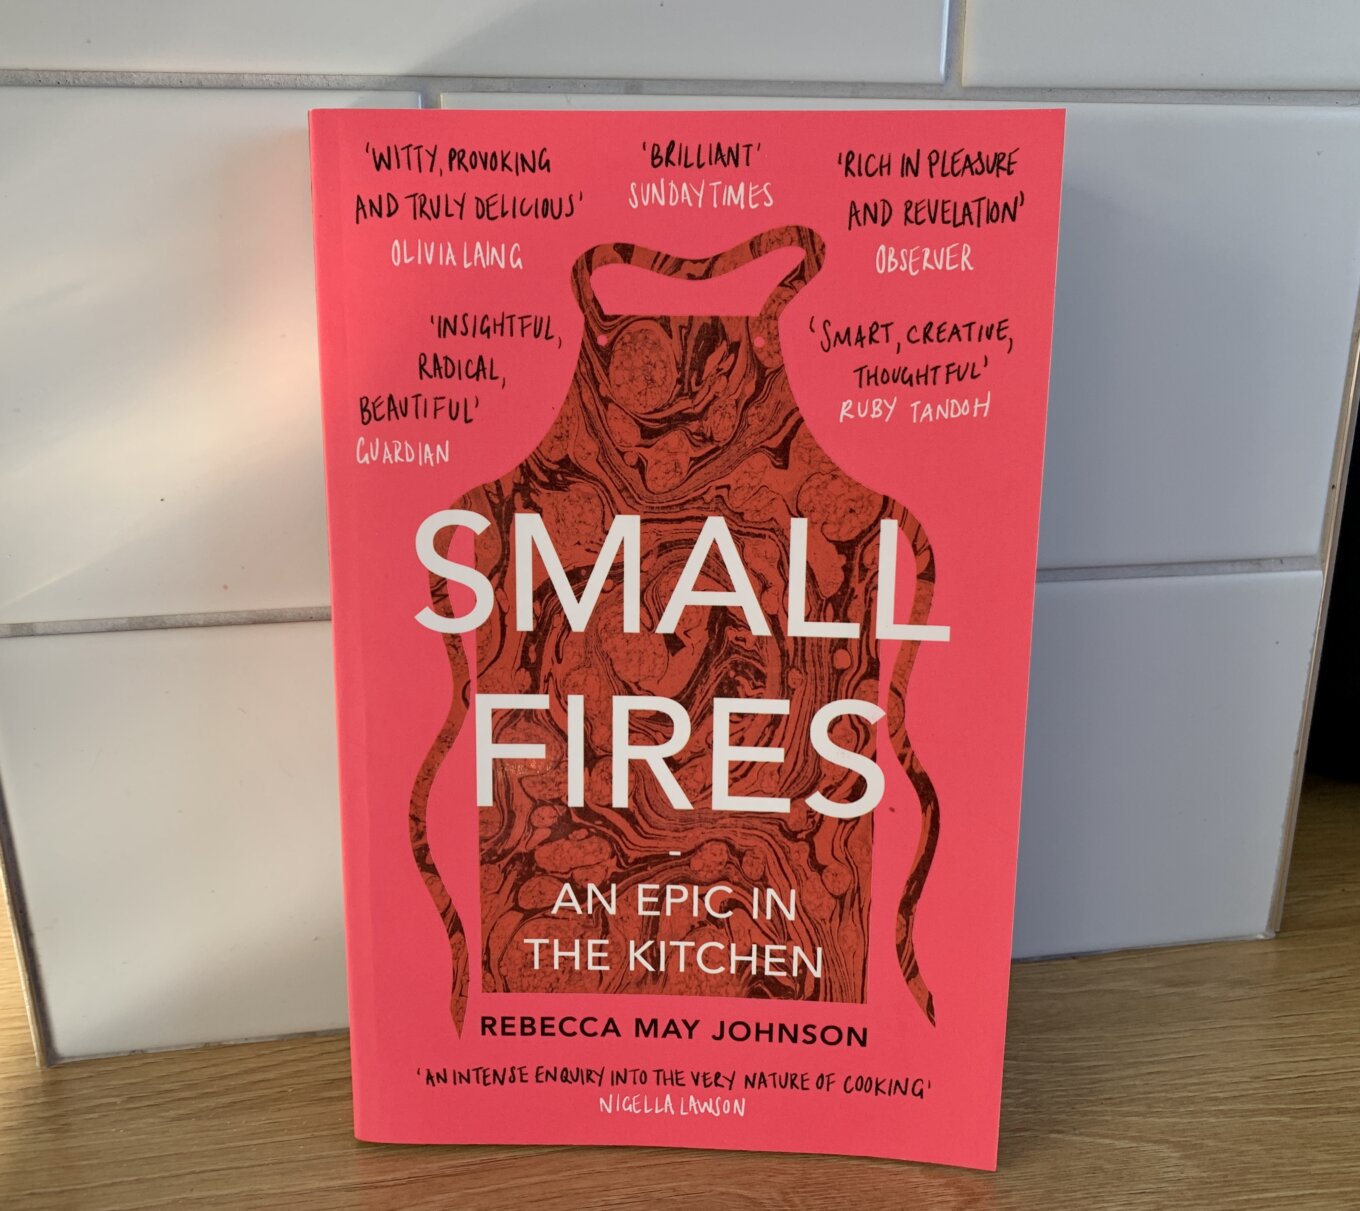 Small fires book